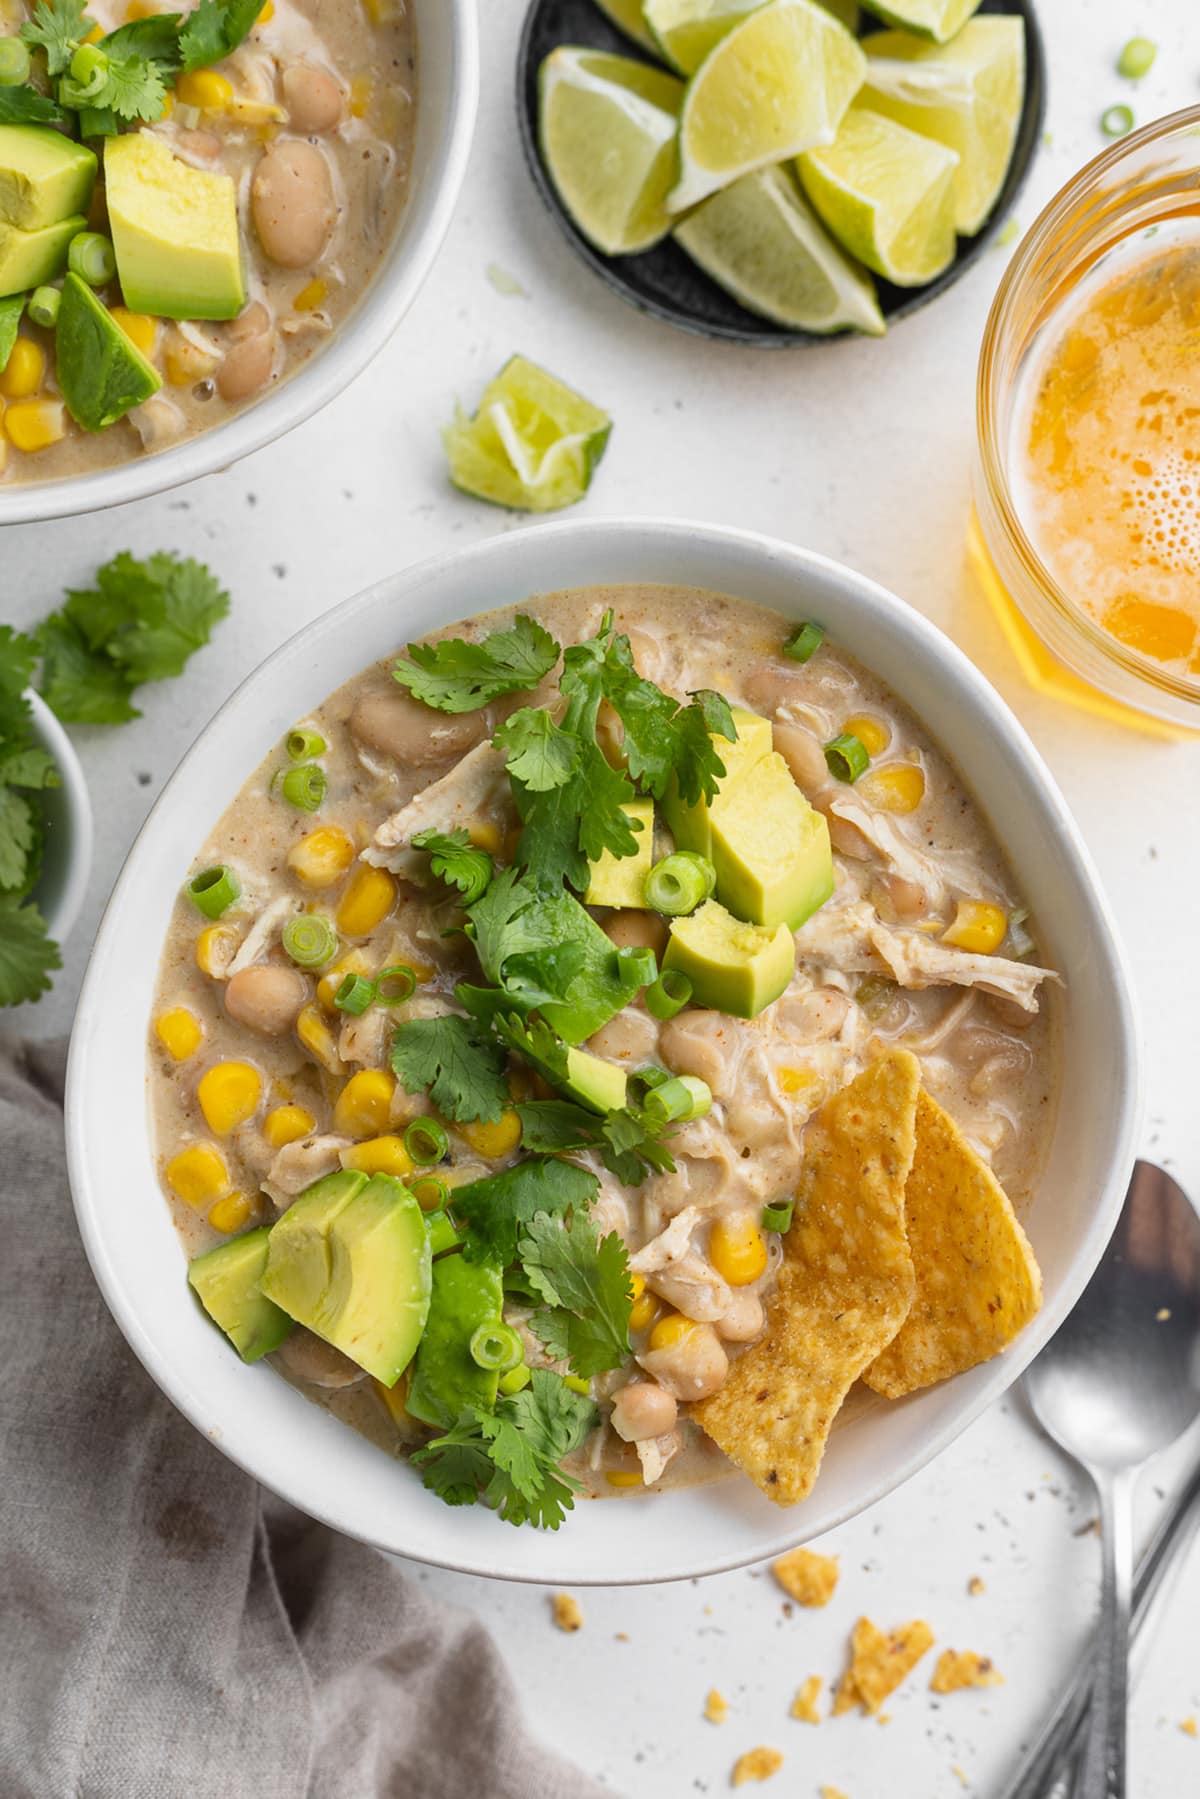 Top-down view of a bowl of Instant Pot white chicken chili on a neutral tabletop with a glass of white wine and a bowl of lime wedges.